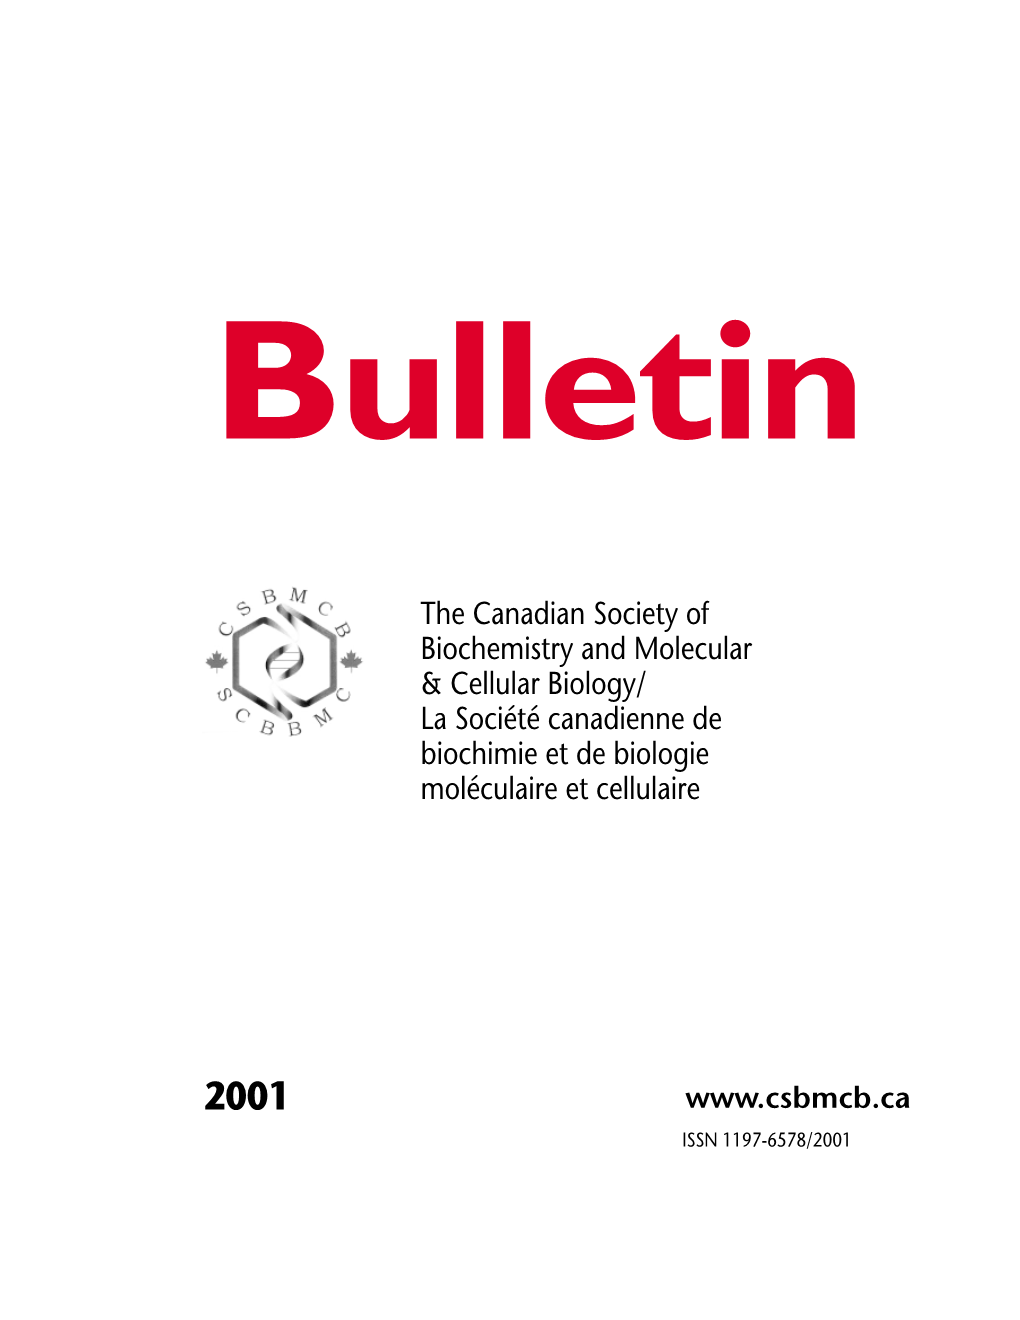 The Canadian Society of Biochemistry and Molecular & Cellular Biology